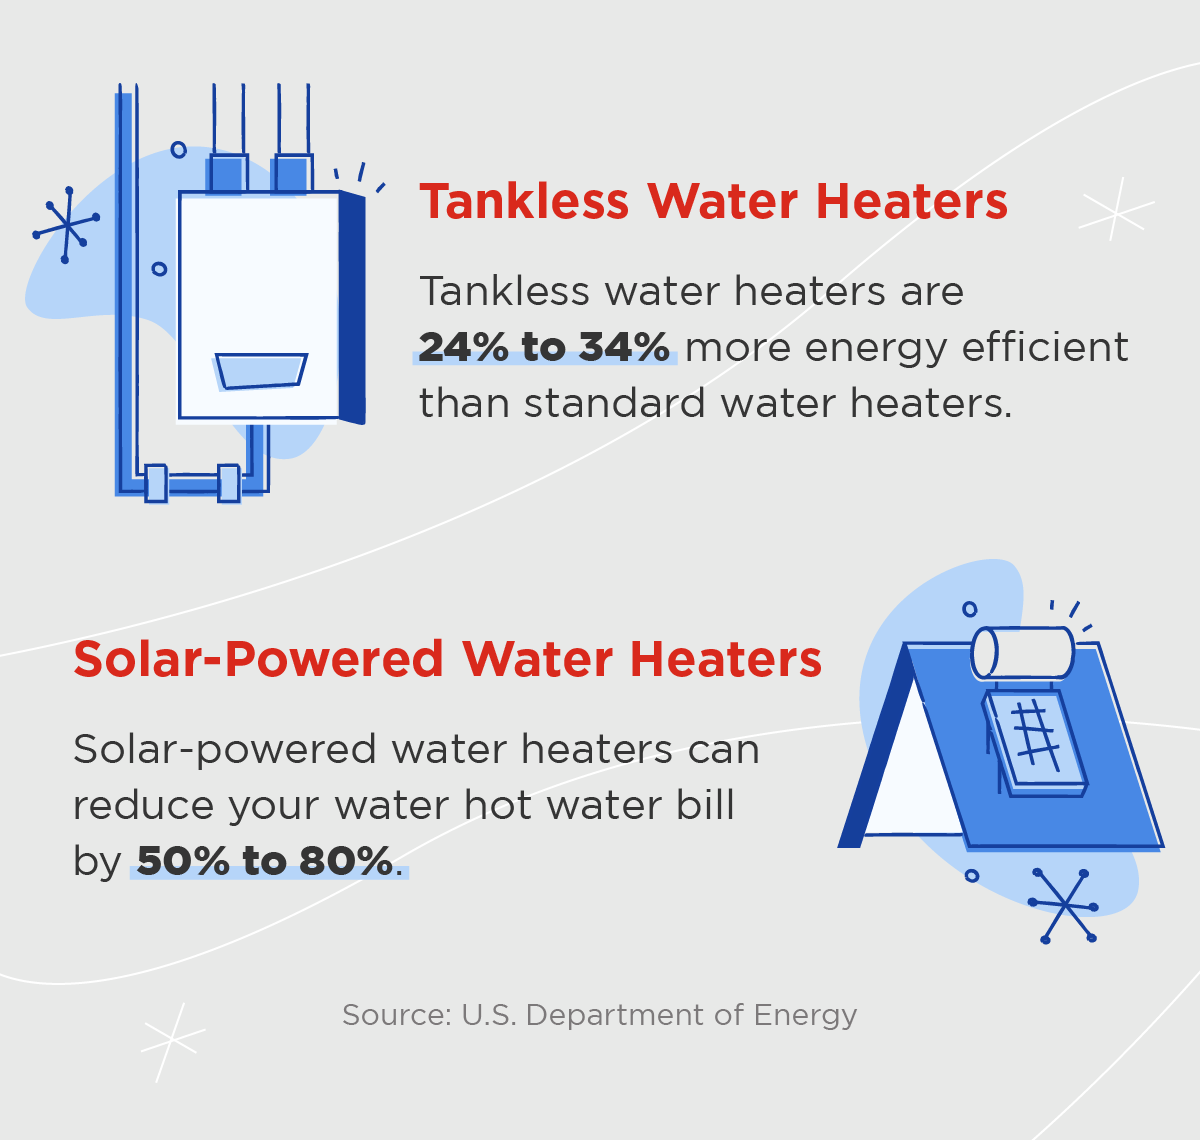 Illustrations of tankless water heaters and solar-powered water heaters with statistics about how much energy they save.